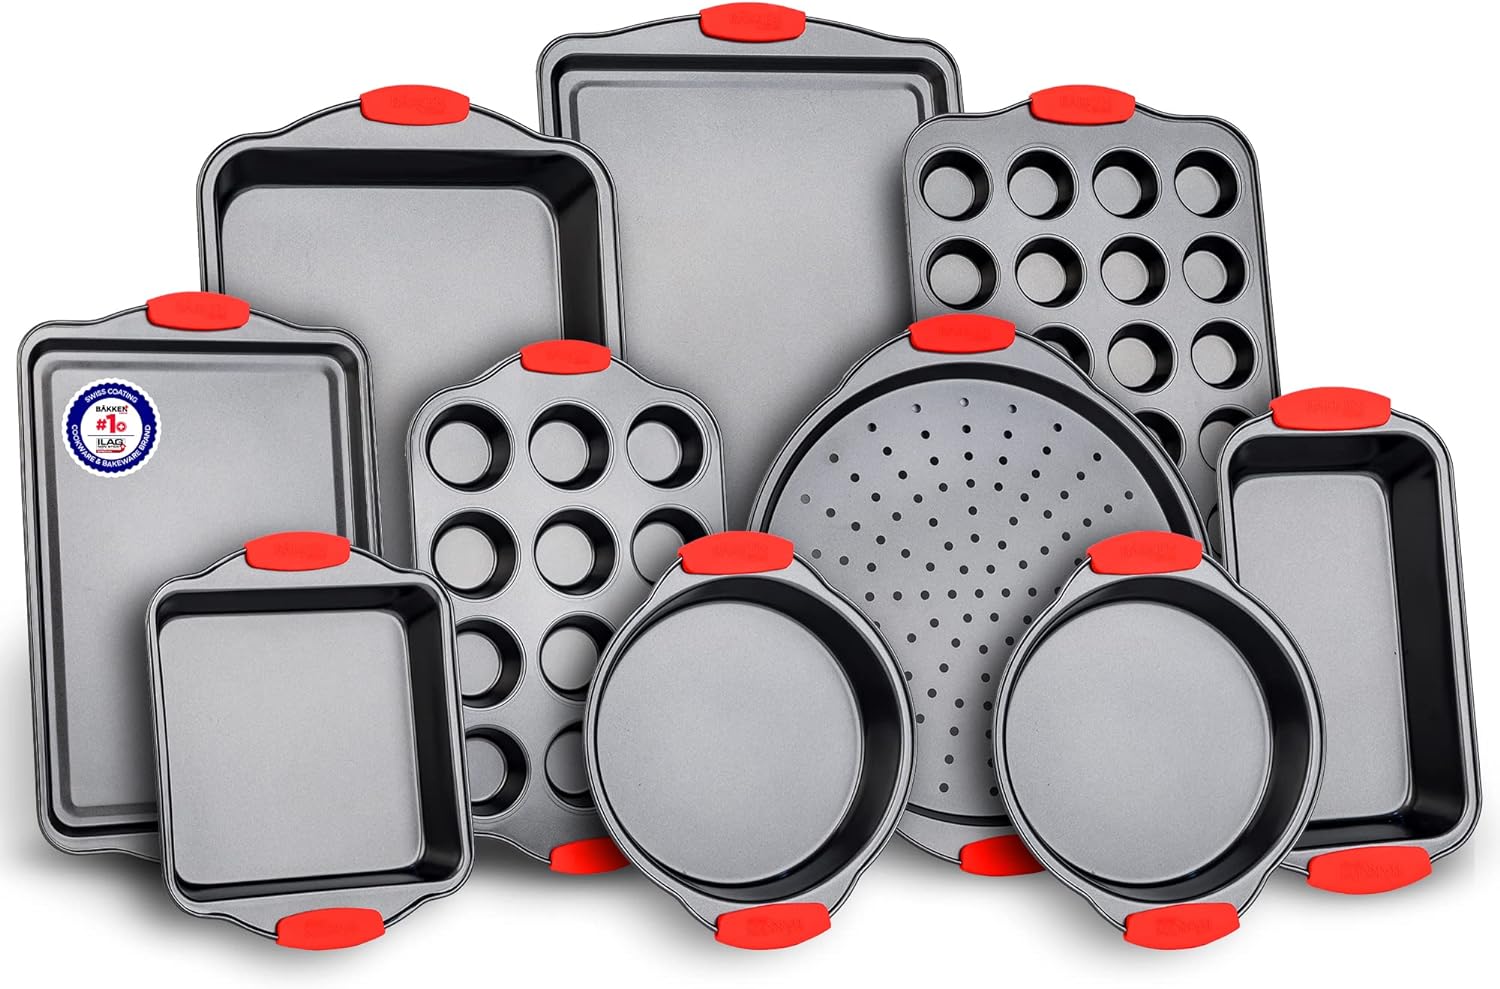 Baking Set – 10 Piece Kitchen Oven Bakeware Set – Deluxe Non-Stick Blue Coating Inside and Outside – Carbon Steel – Red Silicone Handles – PFOA PFOS and PTFE Free by Bakken,Black